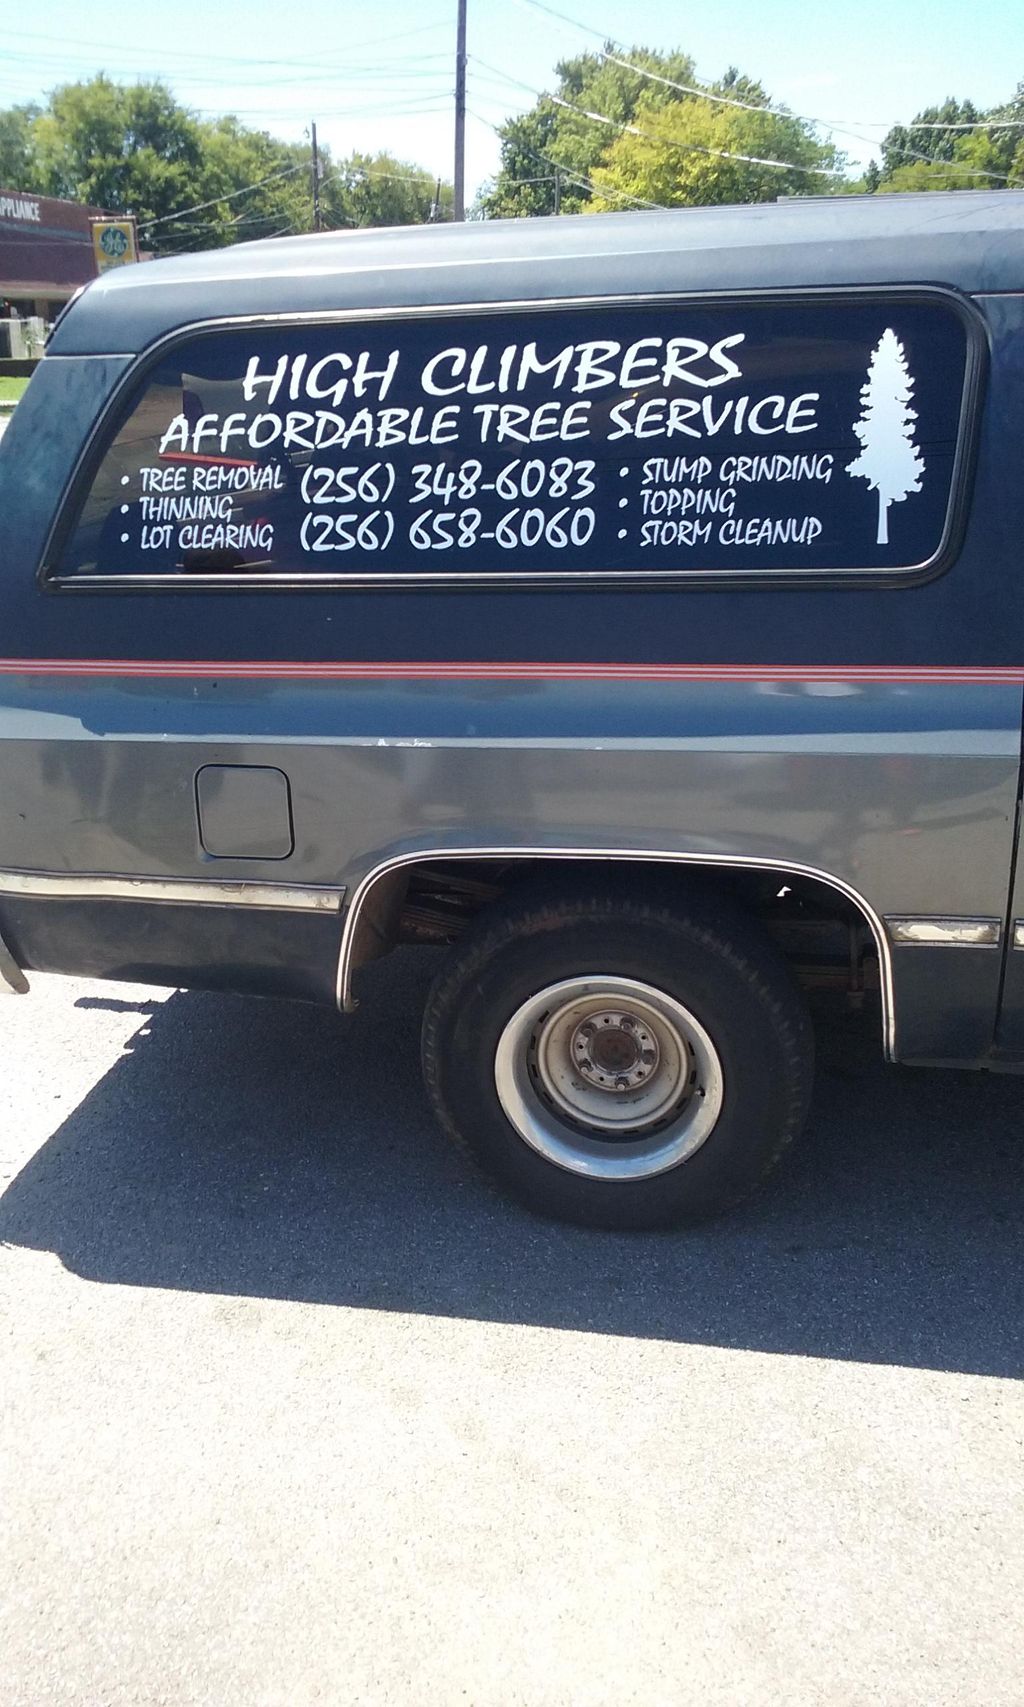 High Climbers Affordable Tree Service and Lands...